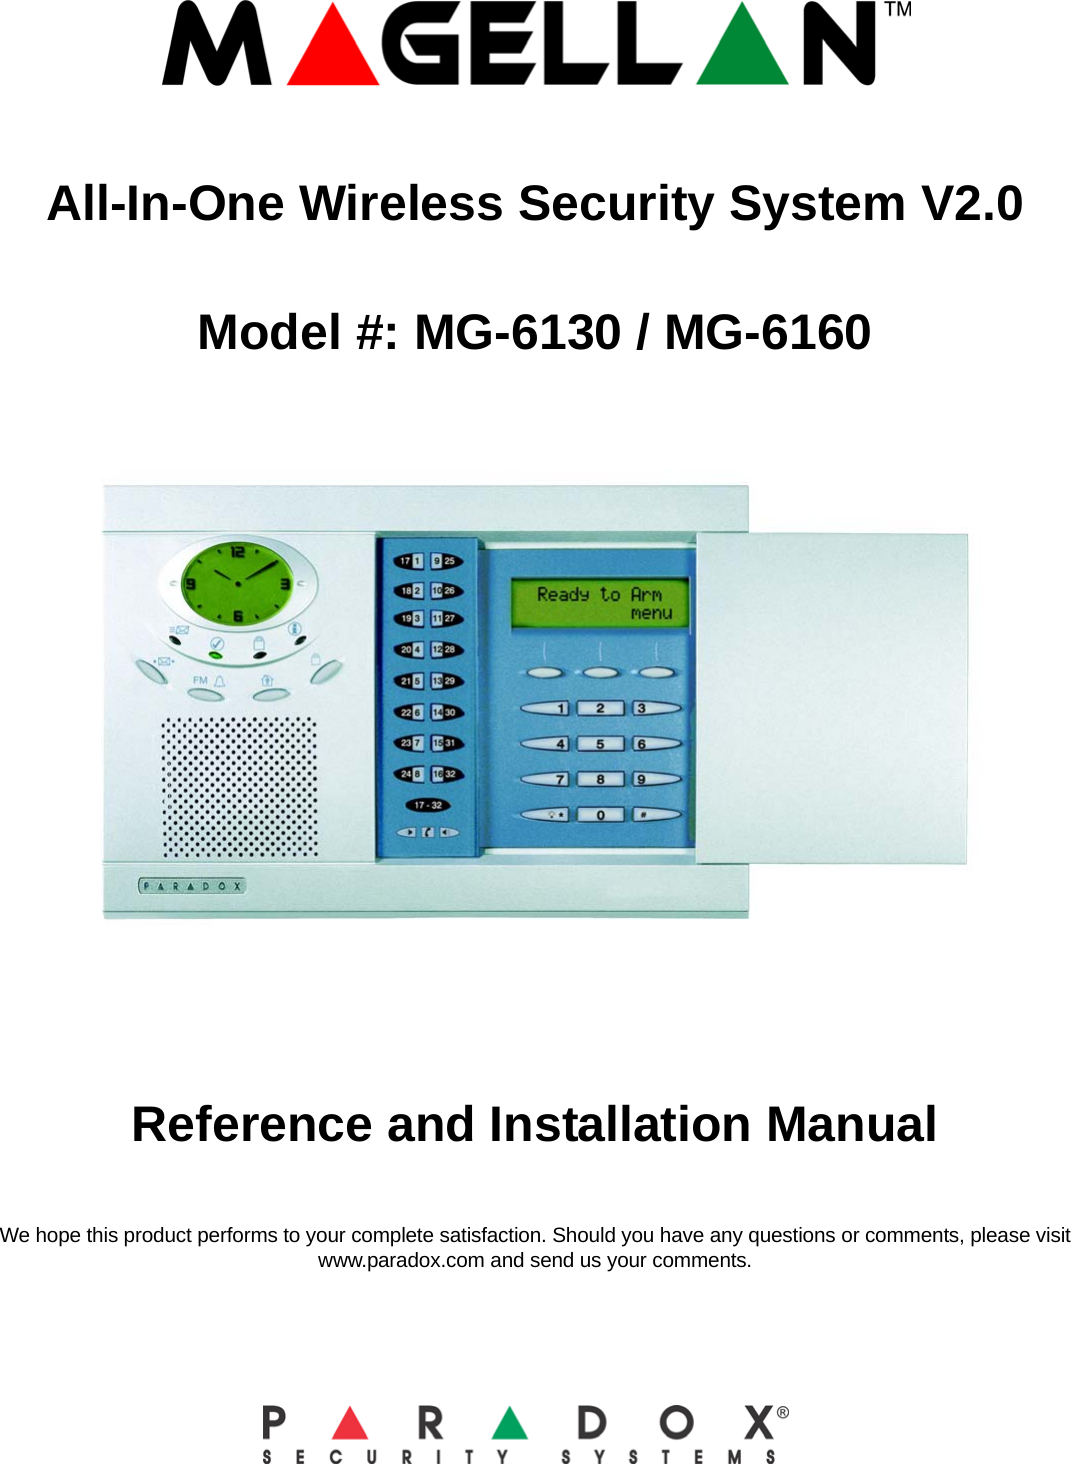 All-In-One Wireless Security System V2.0Model #: MG-6130 / MG-6160Reference and Installation ManualWe hope this product performs to your complete satisfaction. Should you have any questions or comments, please visit www.paradox.com and send us your comments.